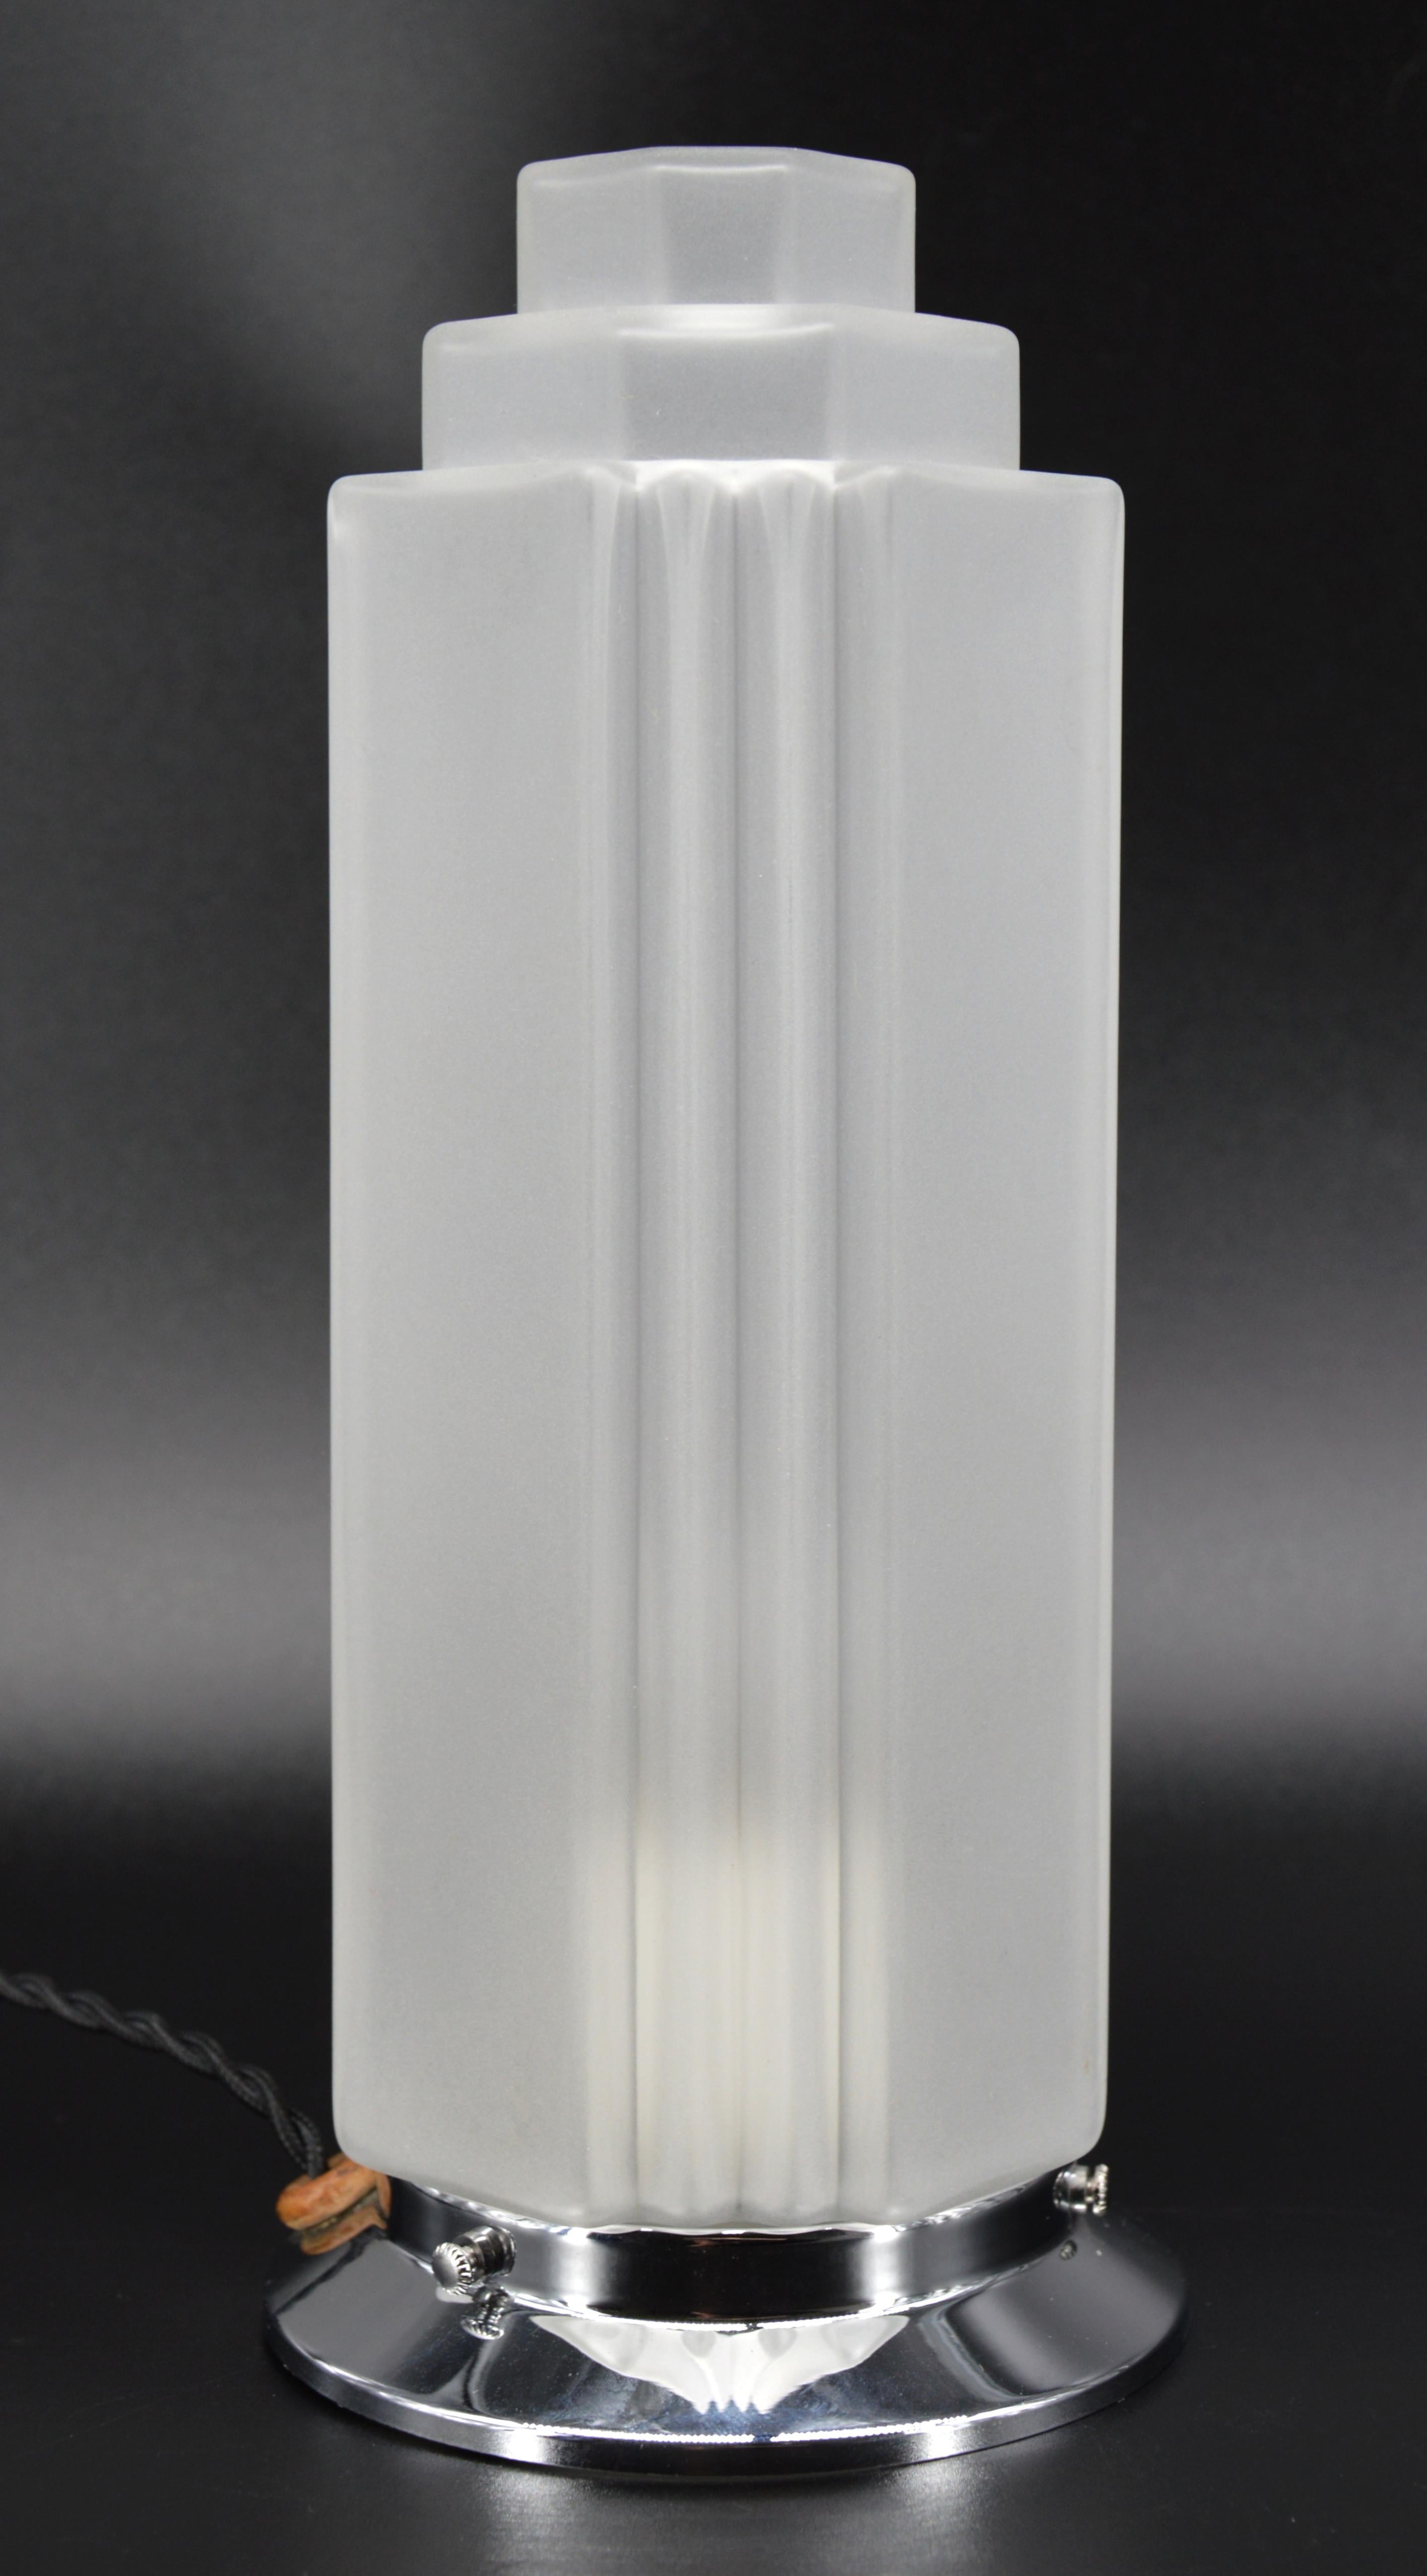 French Art Deco table lamp, France, 1930s. Skyscraper shape. Frosted glass shade on its chrome base. 3 lamps are available. Height: 10.6